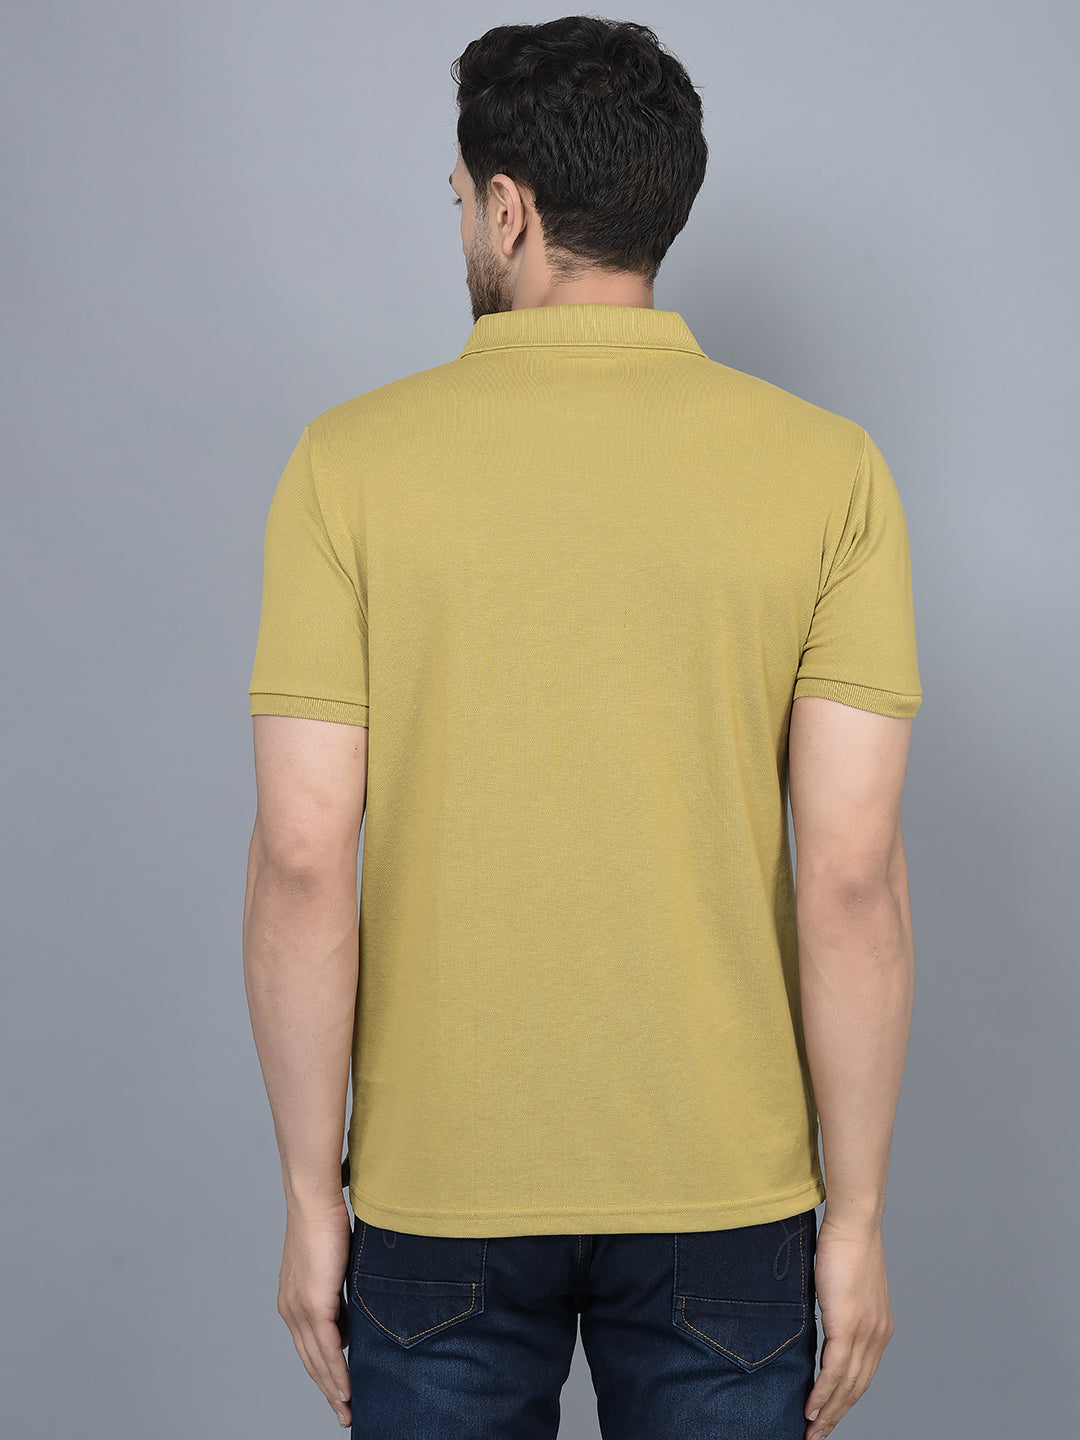 Cobb Mustard Solid Polo Neck T-Shirt